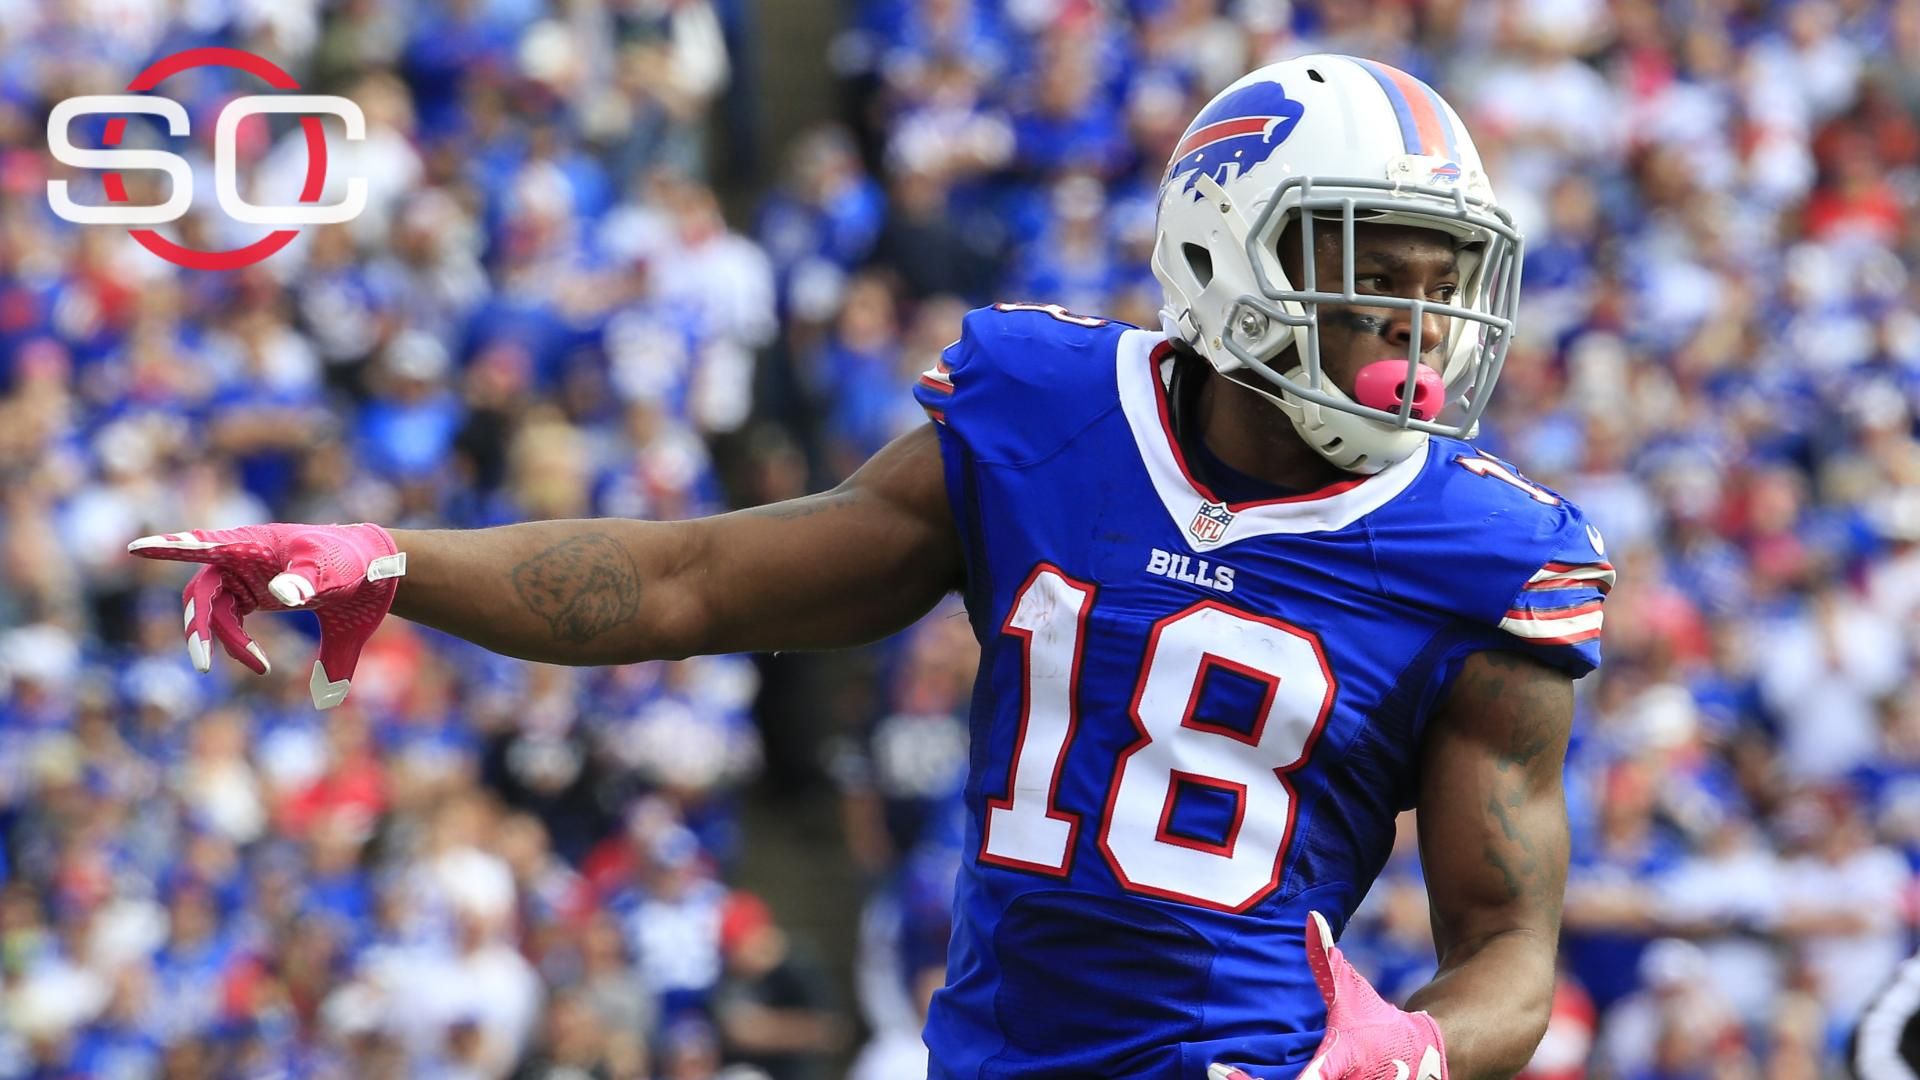 Percy Harvin frustrated with injuries